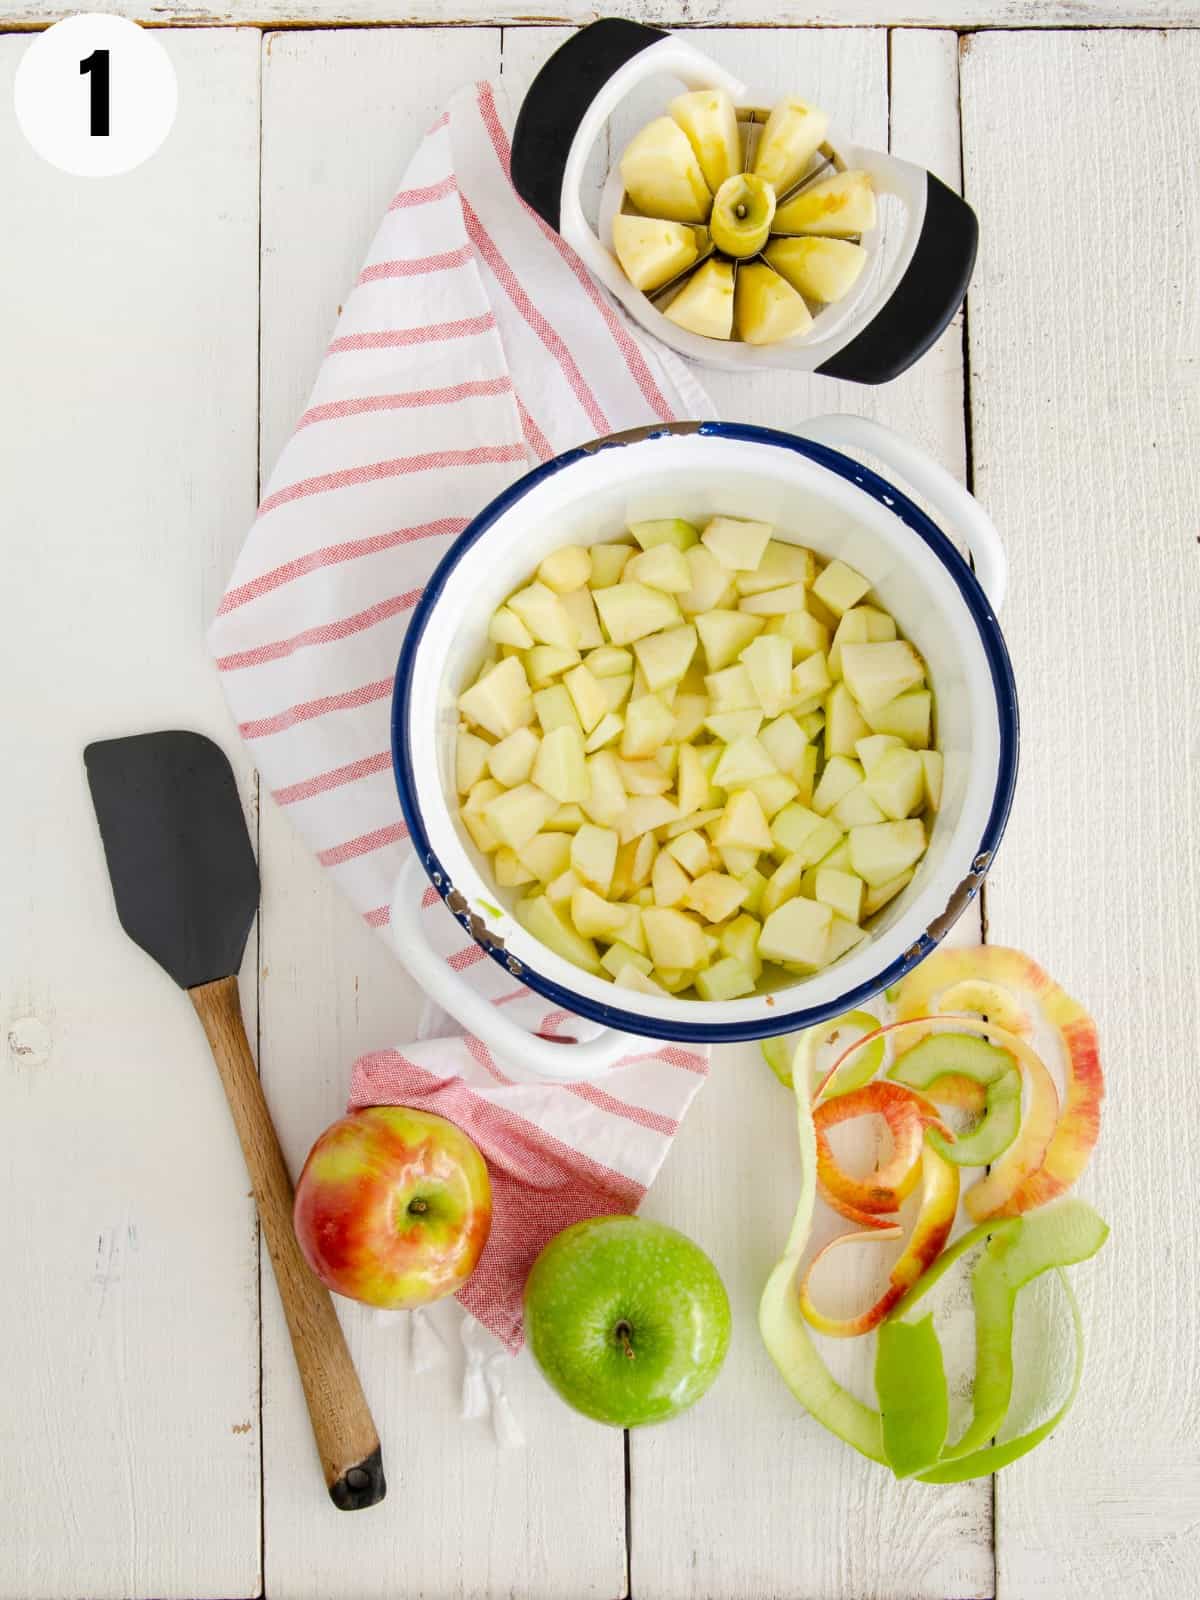 Apples in a pot with apples and peelings next to it.